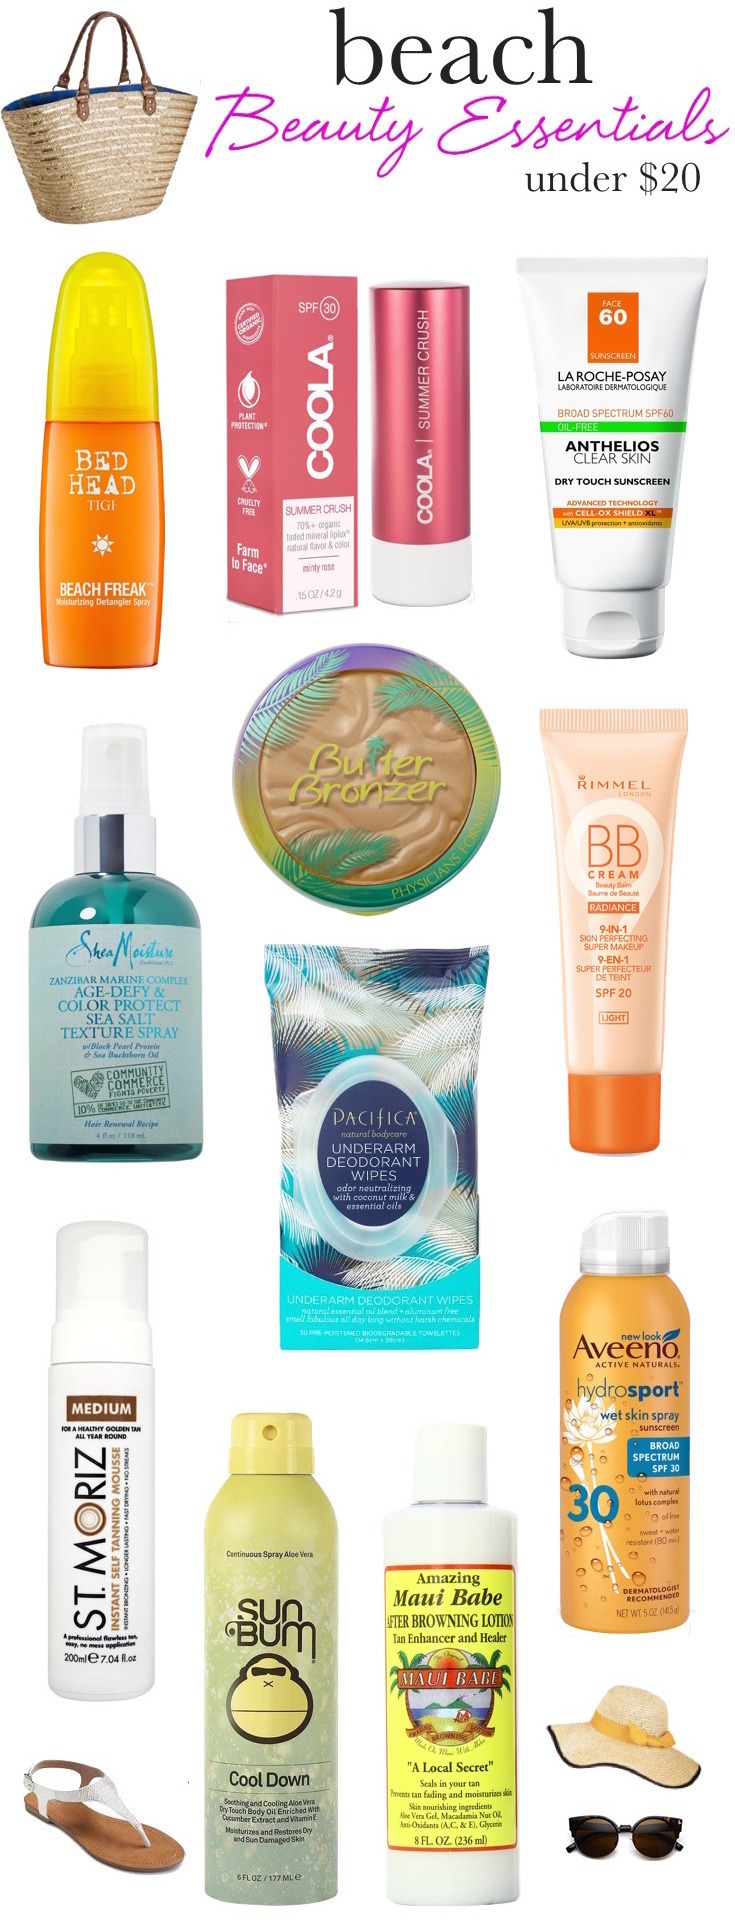 Beach beauty essentials to keep you looking fresh and fabulous, no matter how hot & humid the day might be!